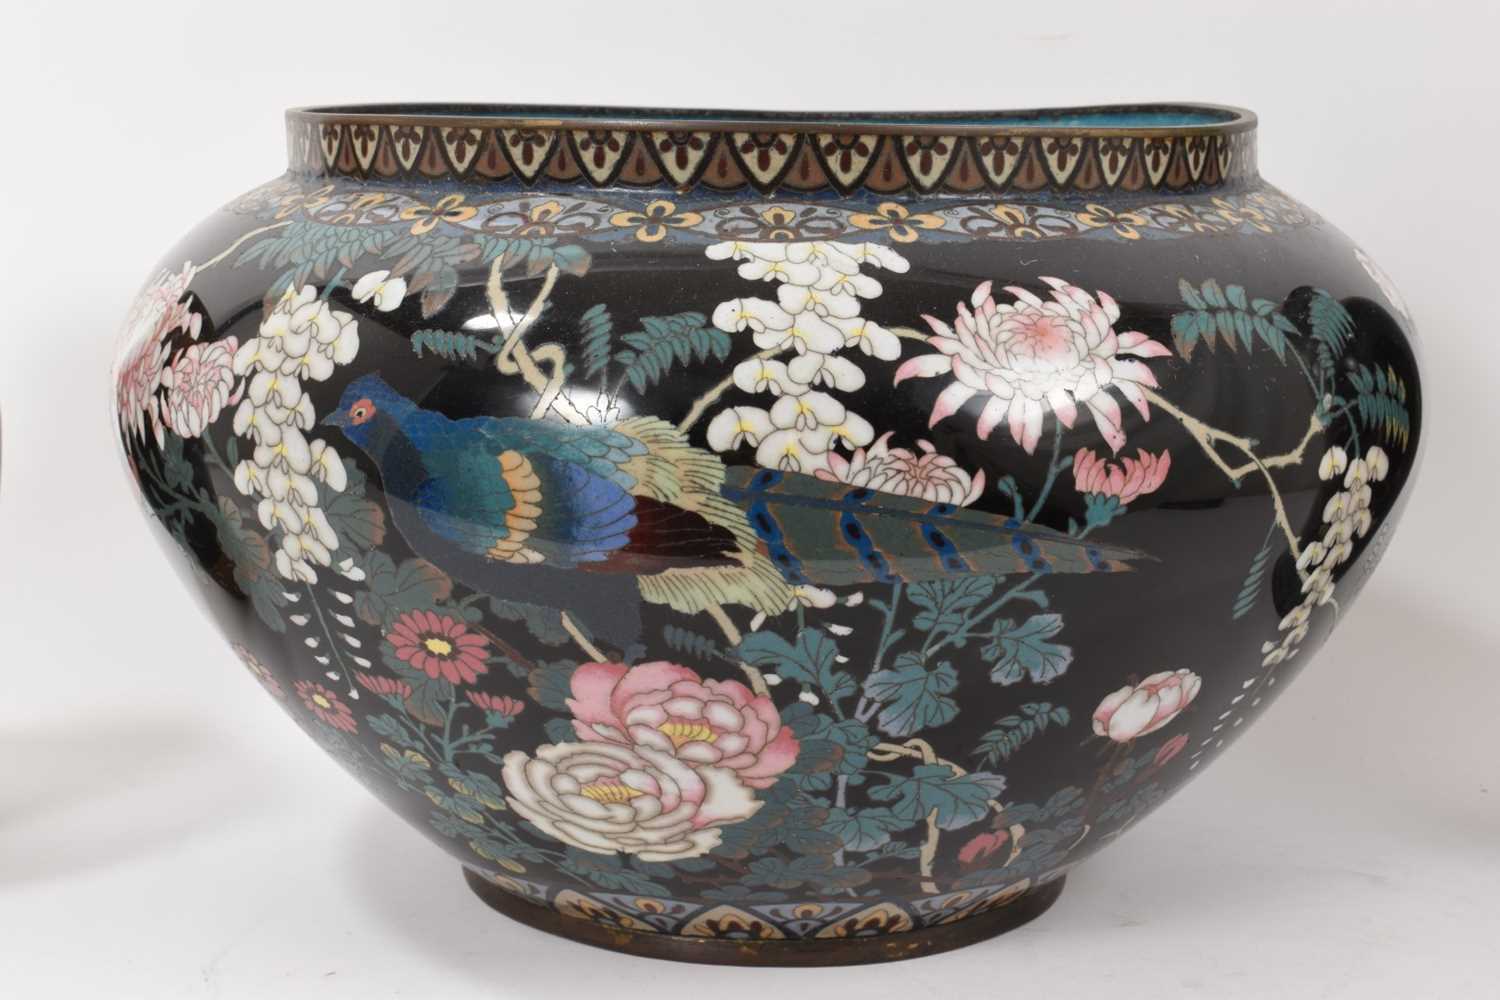 Large Japanese cloisonné jardinière decorated with flowers and birds - Image 2 of 17